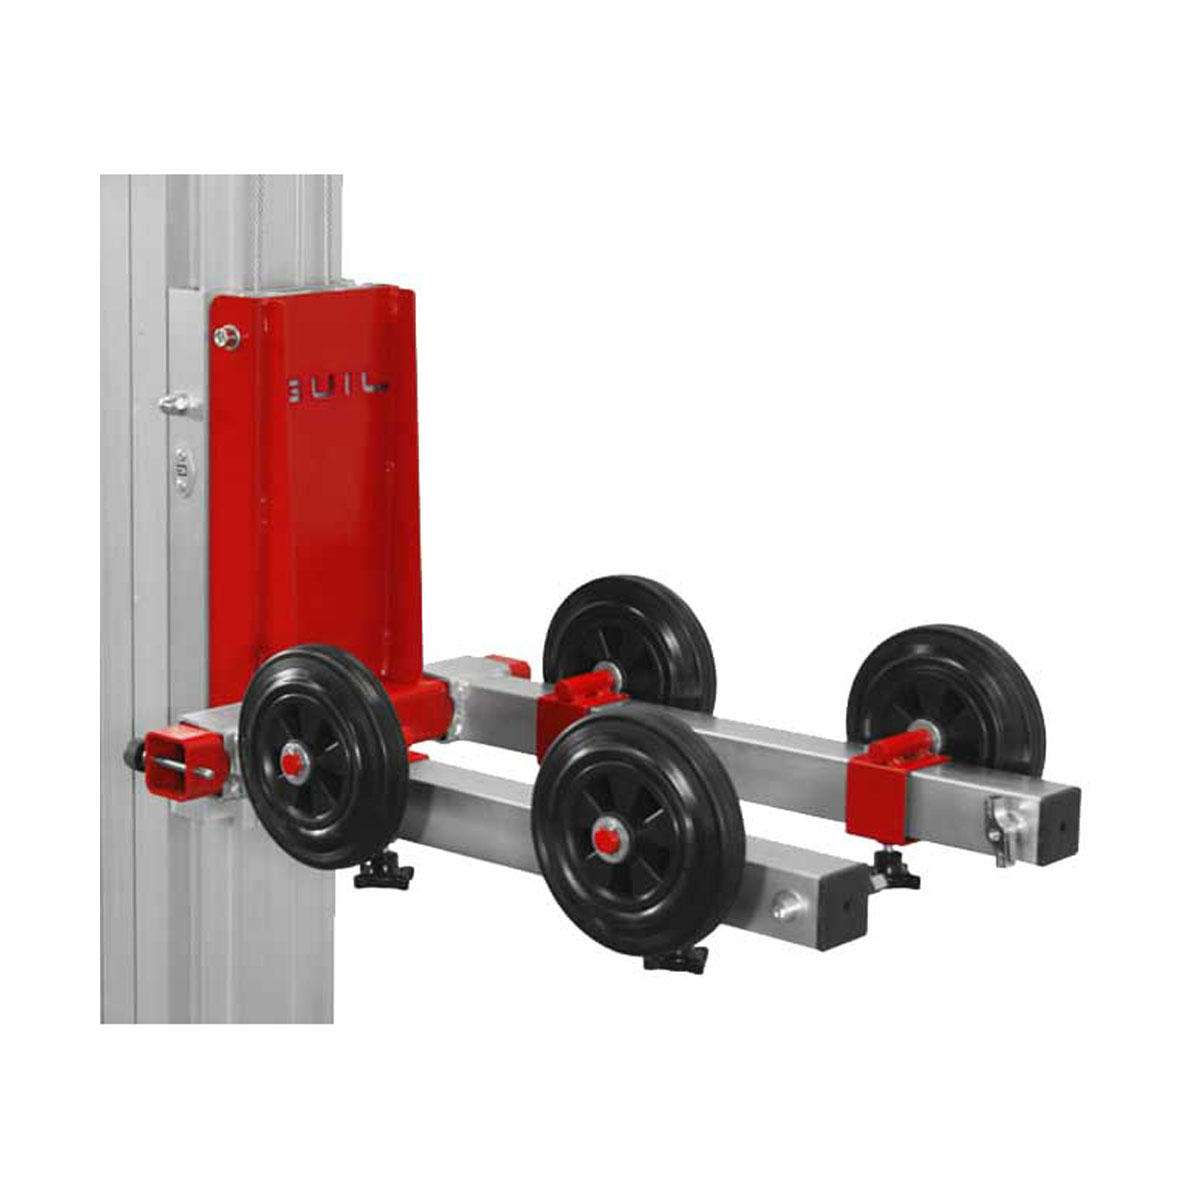 Buy Roller Door Adaptor for GUIL Lift Equipment available at Astrolift NZ